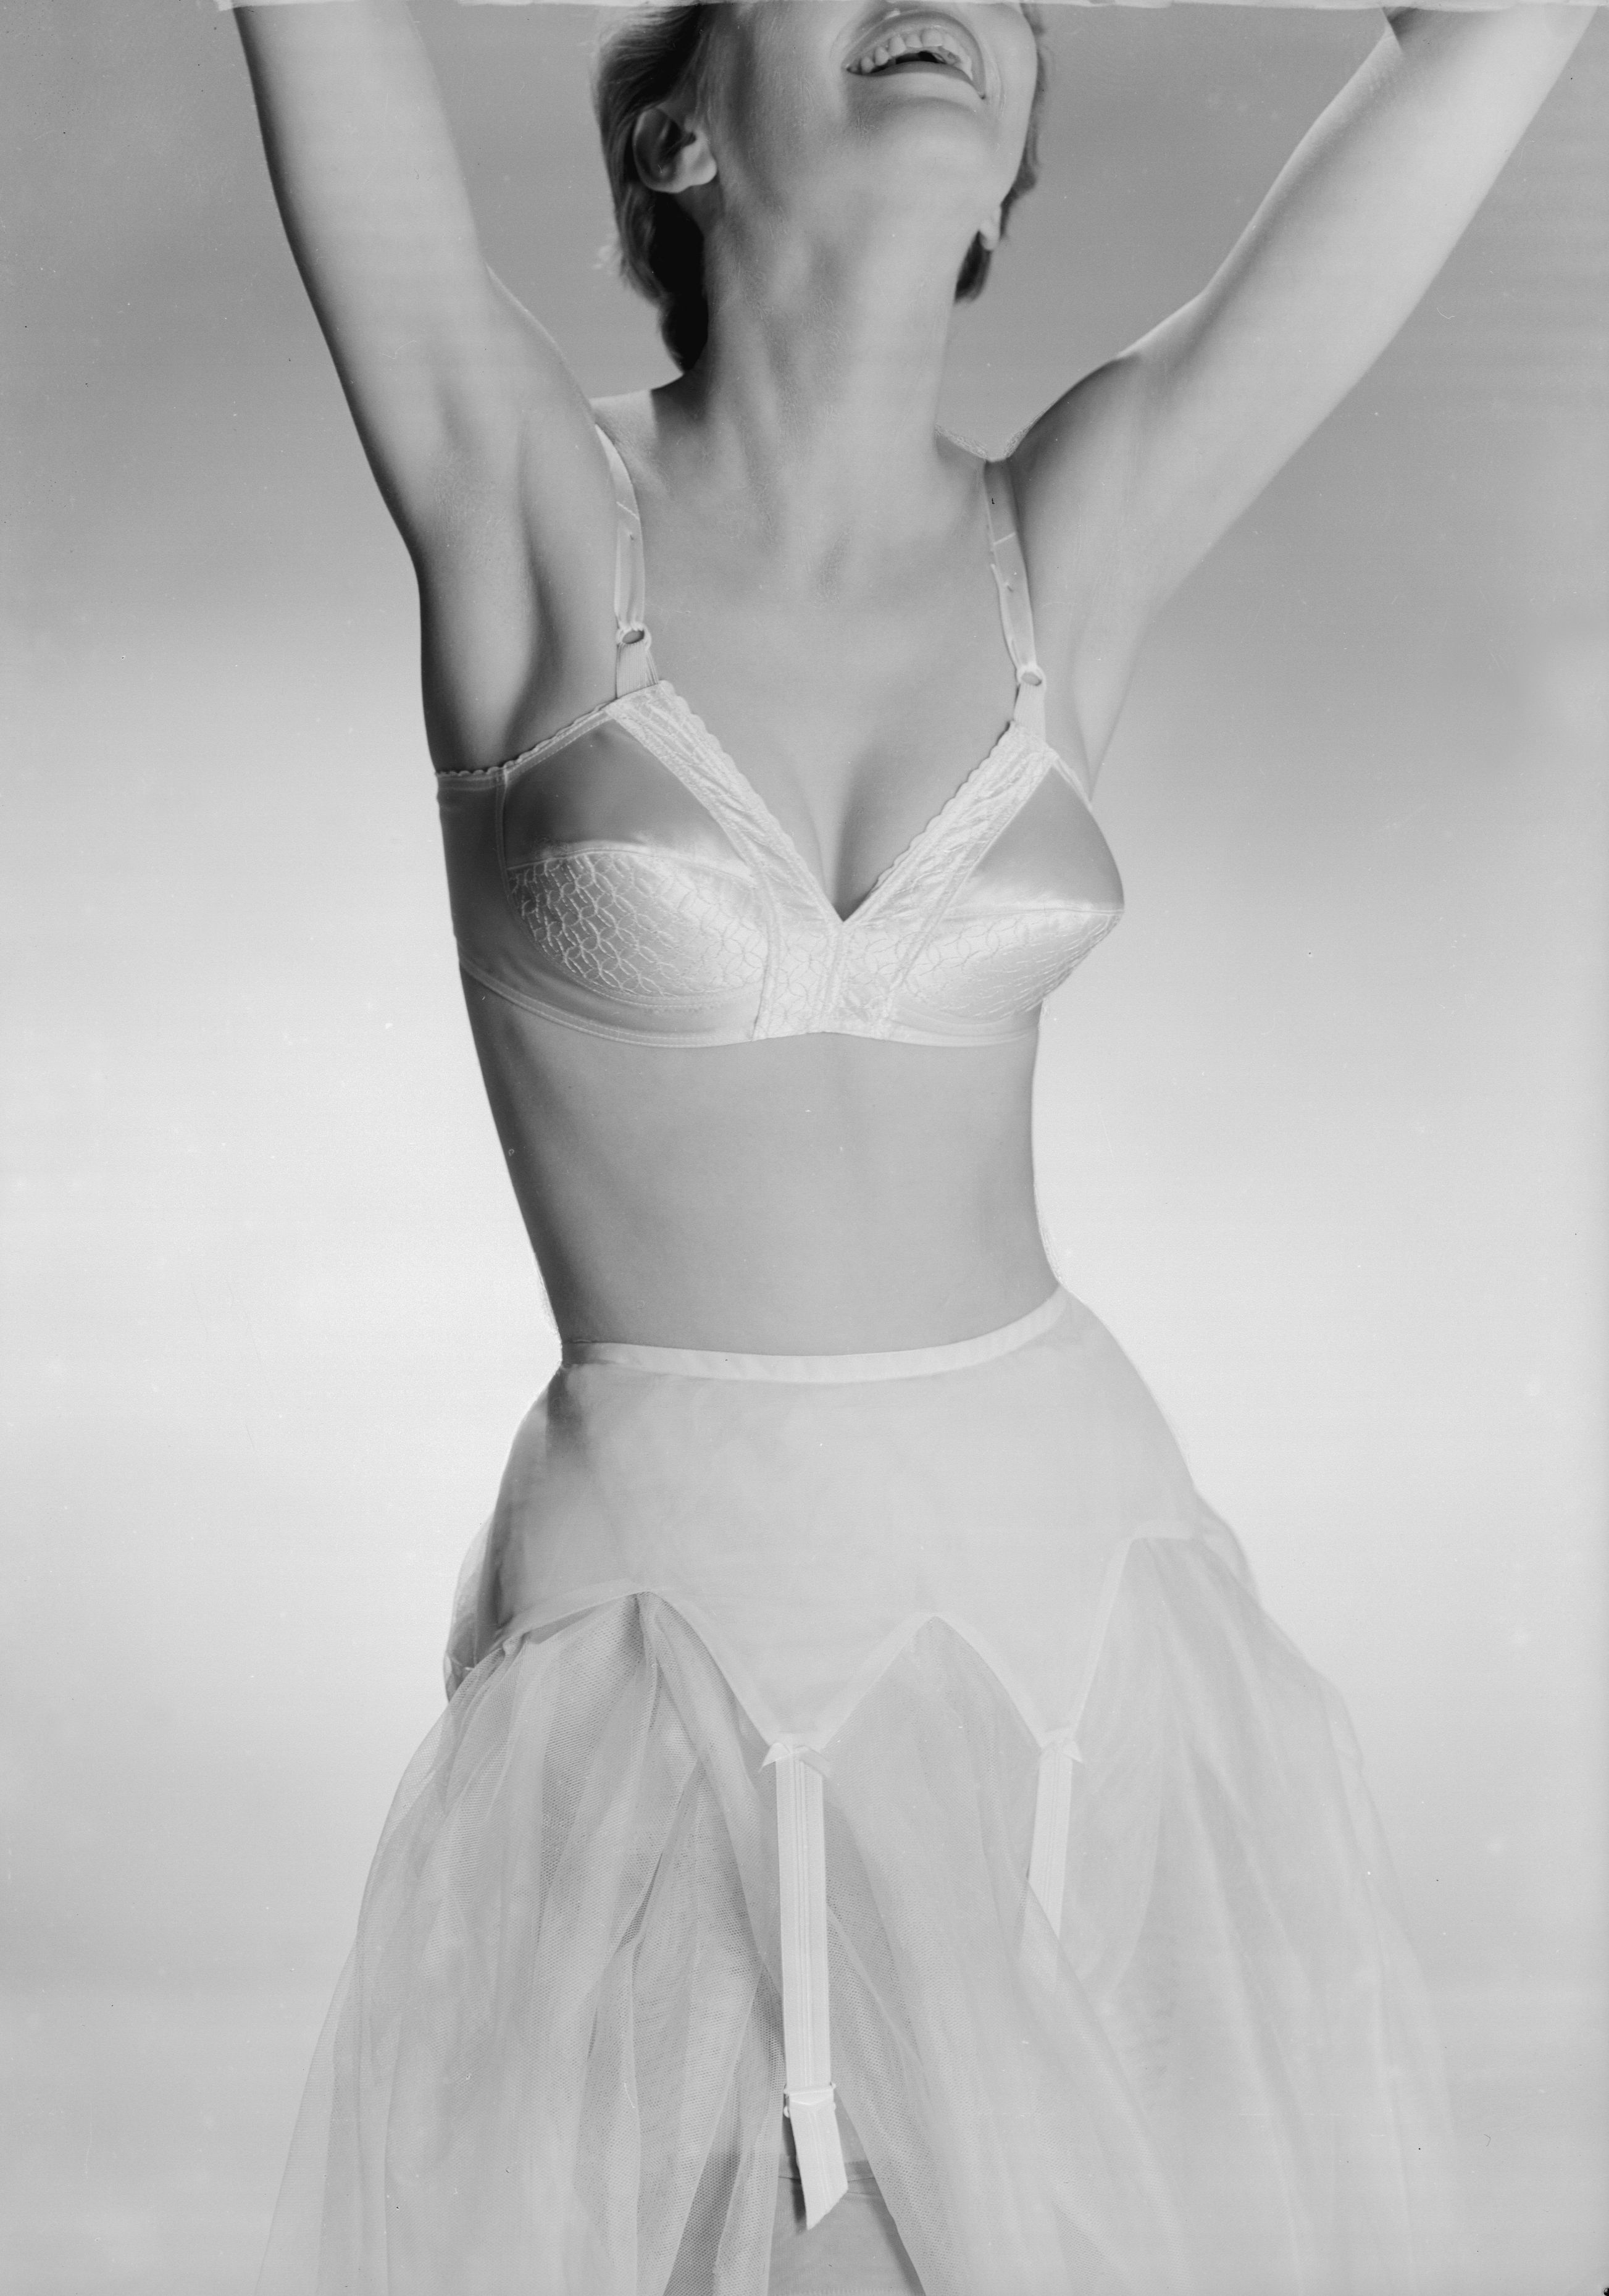 100 Years of Brassieres: The Historical Evolution of the Bra